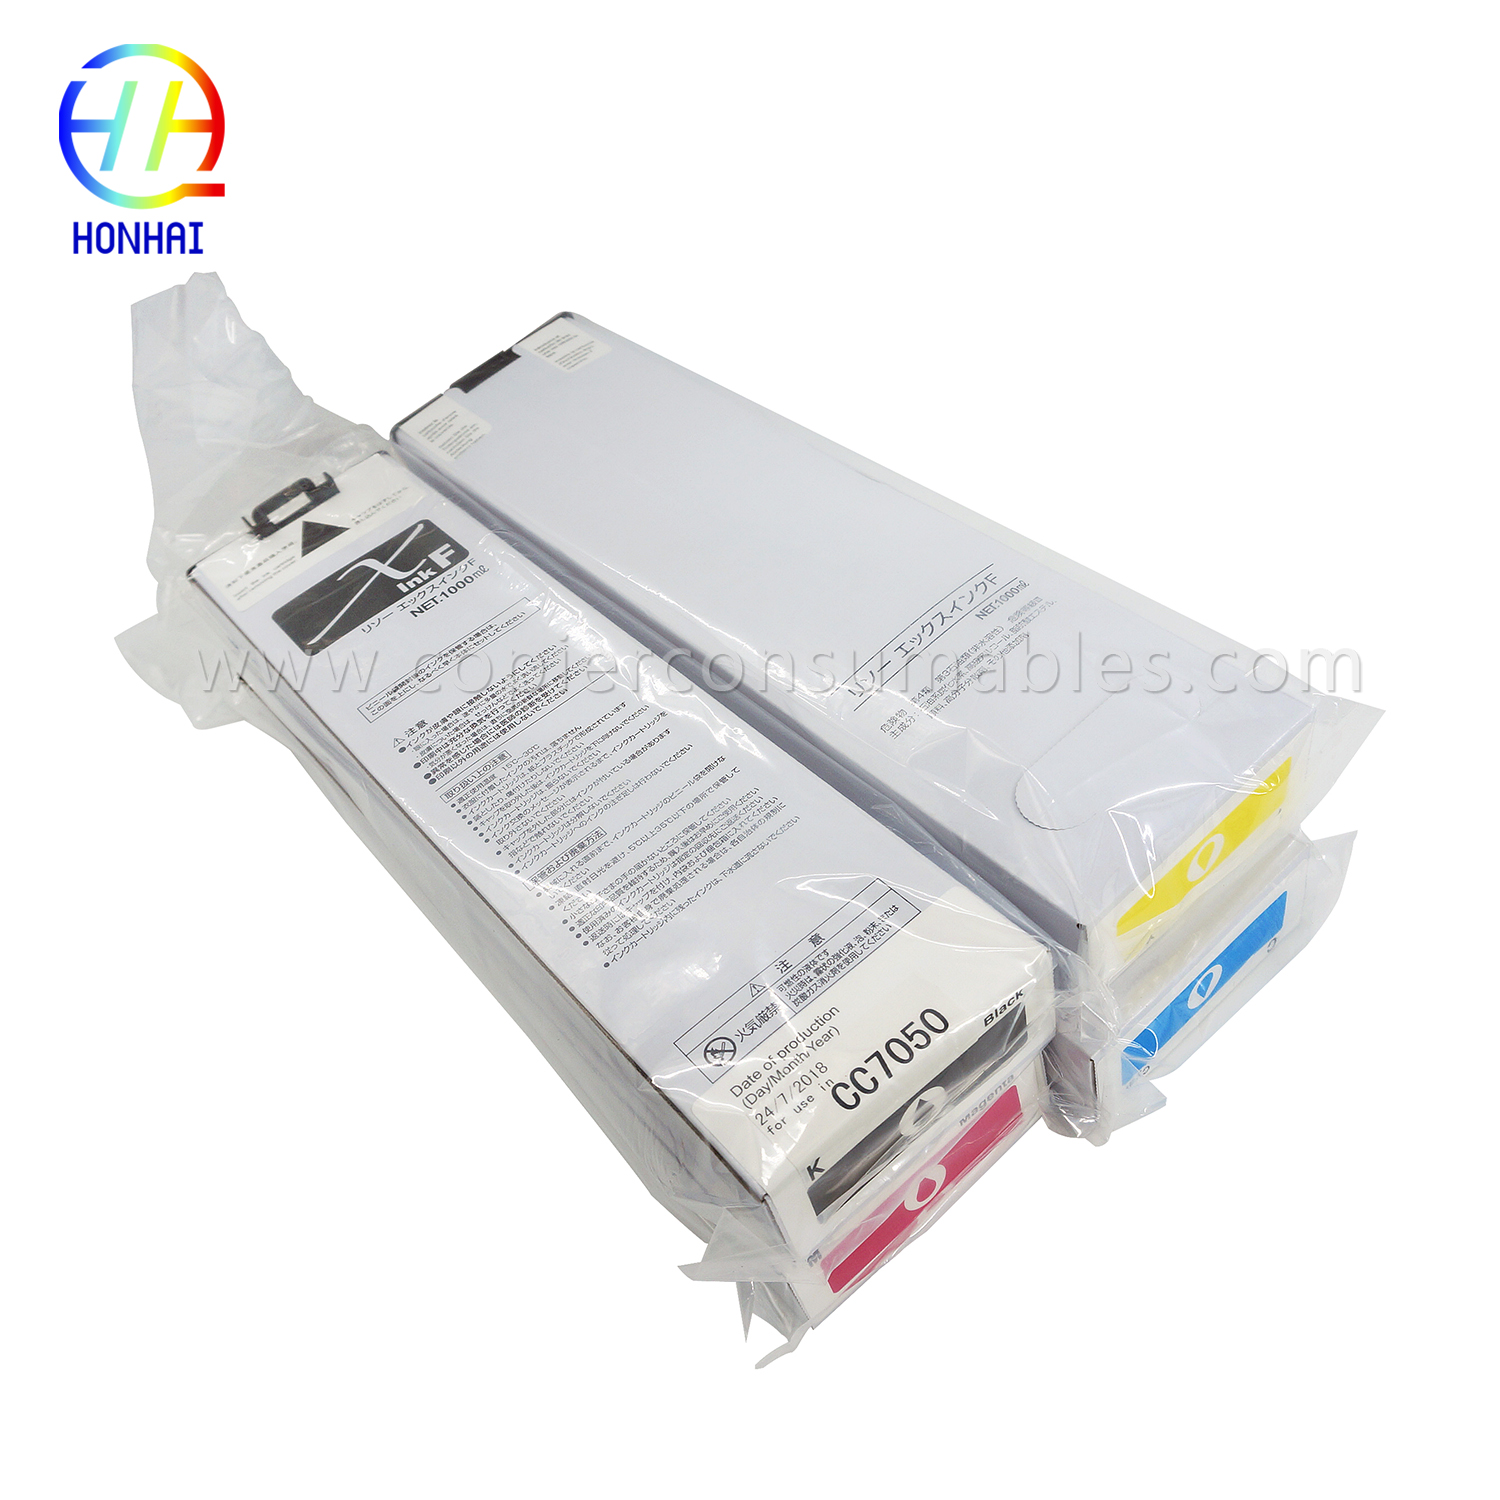 Ink Cartridge Risograph ComColor 3010 3050 3150 7010 7050 7150 9050 9150 HC 5000 5500 (S-6300G S-6301G S-6302G S-6303G) (8)